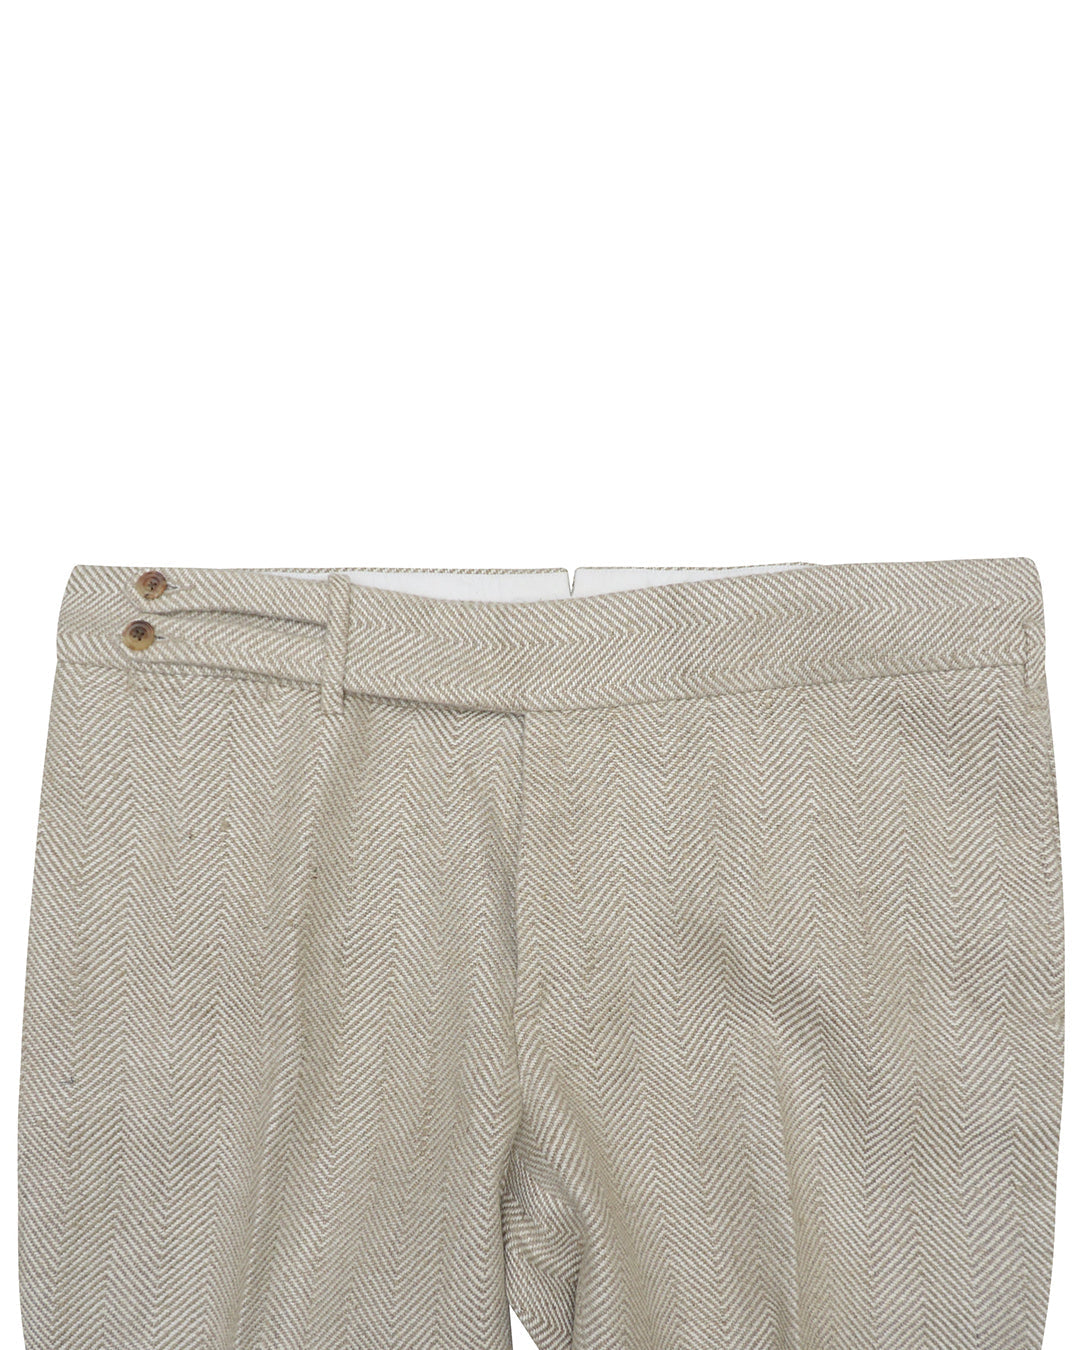 Back view of custom linen pants for men by Luxire in golden tan